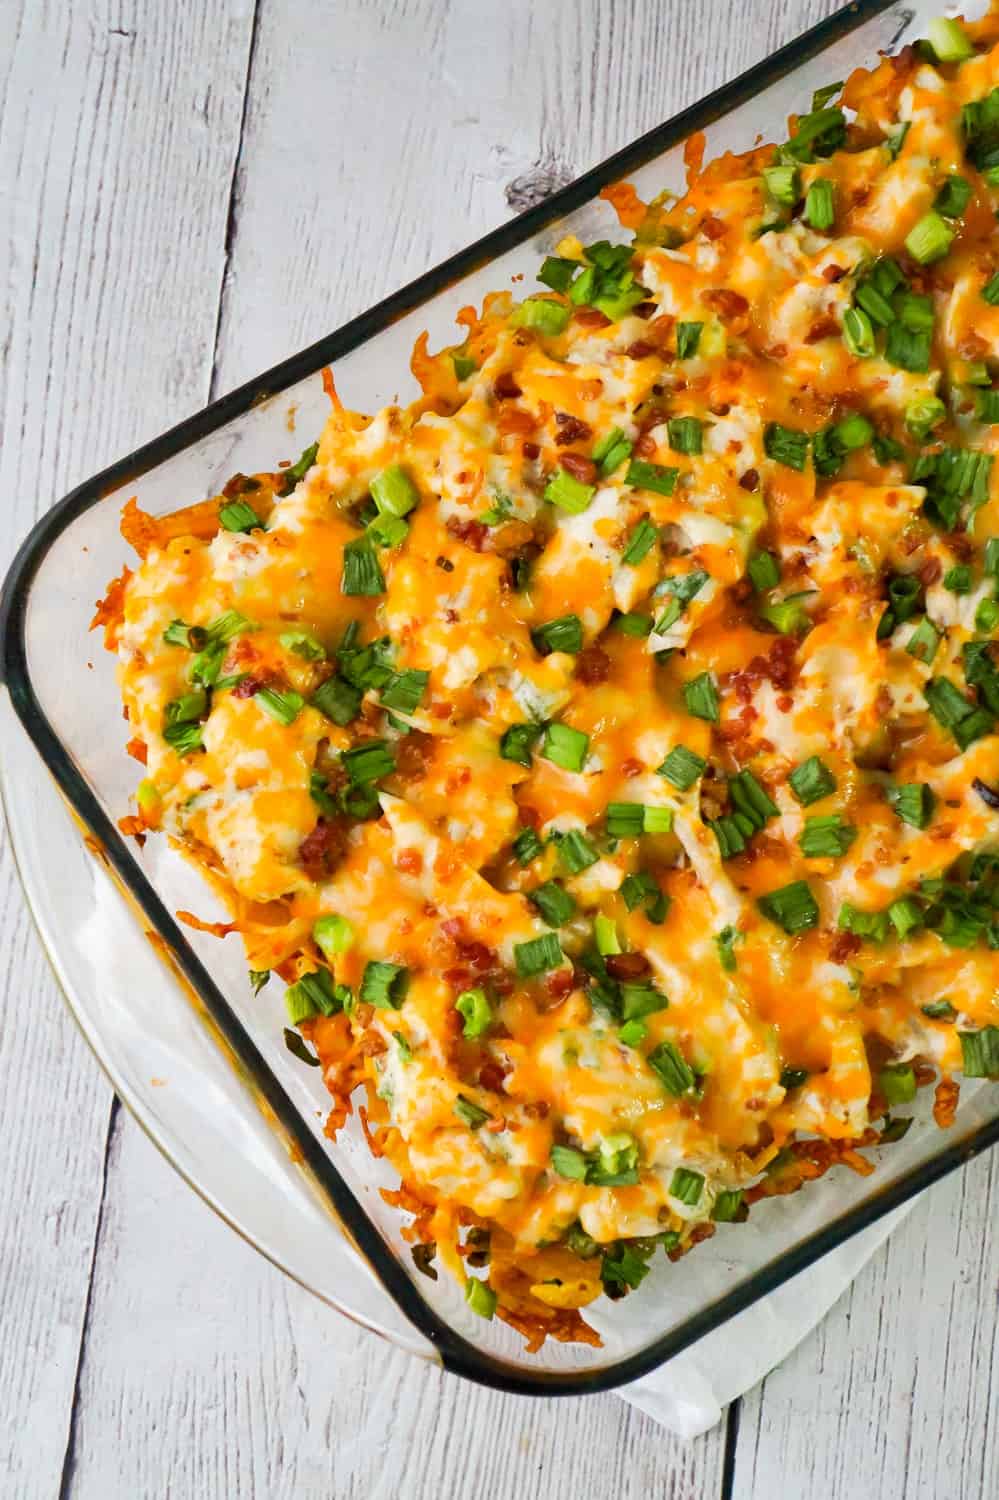 Chicken Bacon Ranch Frito Pie is a quick and easy dinner recipe using rotisserie chicken. This tasty casserole starts out with a base of Frito's corn chips topped with a mixture of shredded chicken, real bacon bits, green onions and ranch dressing, finished off with a layer of shredded cheese.